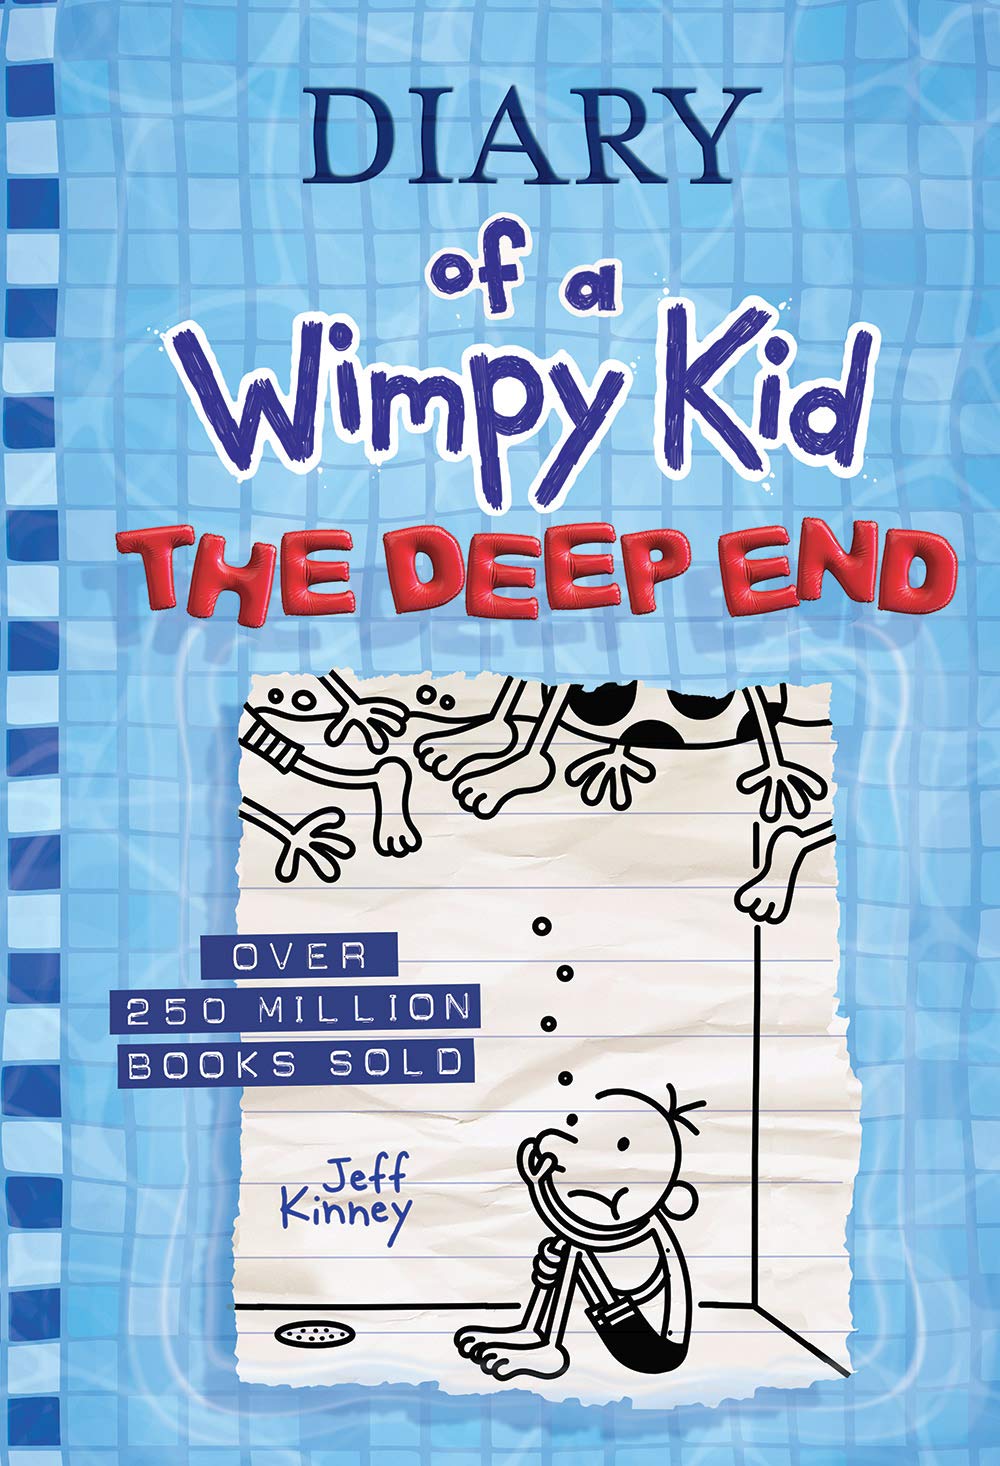 Diary of a Wimpy Kid #15 : The Deep End  (Hardcover)